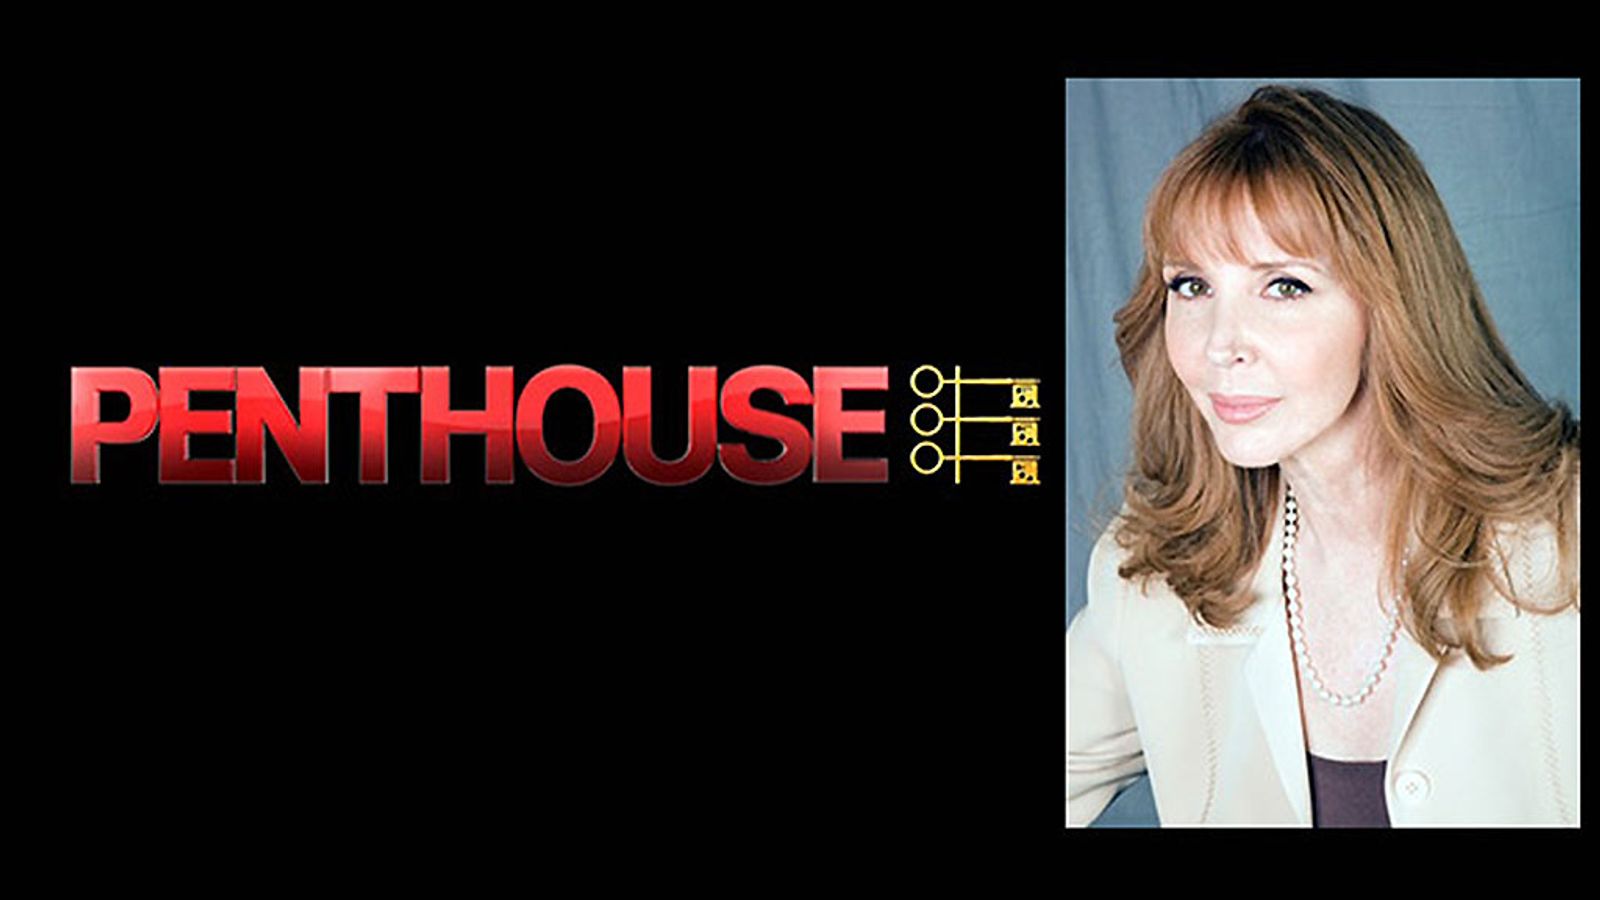 Penthouse Bankruptcy Case May Focus on Legality of Original Loan